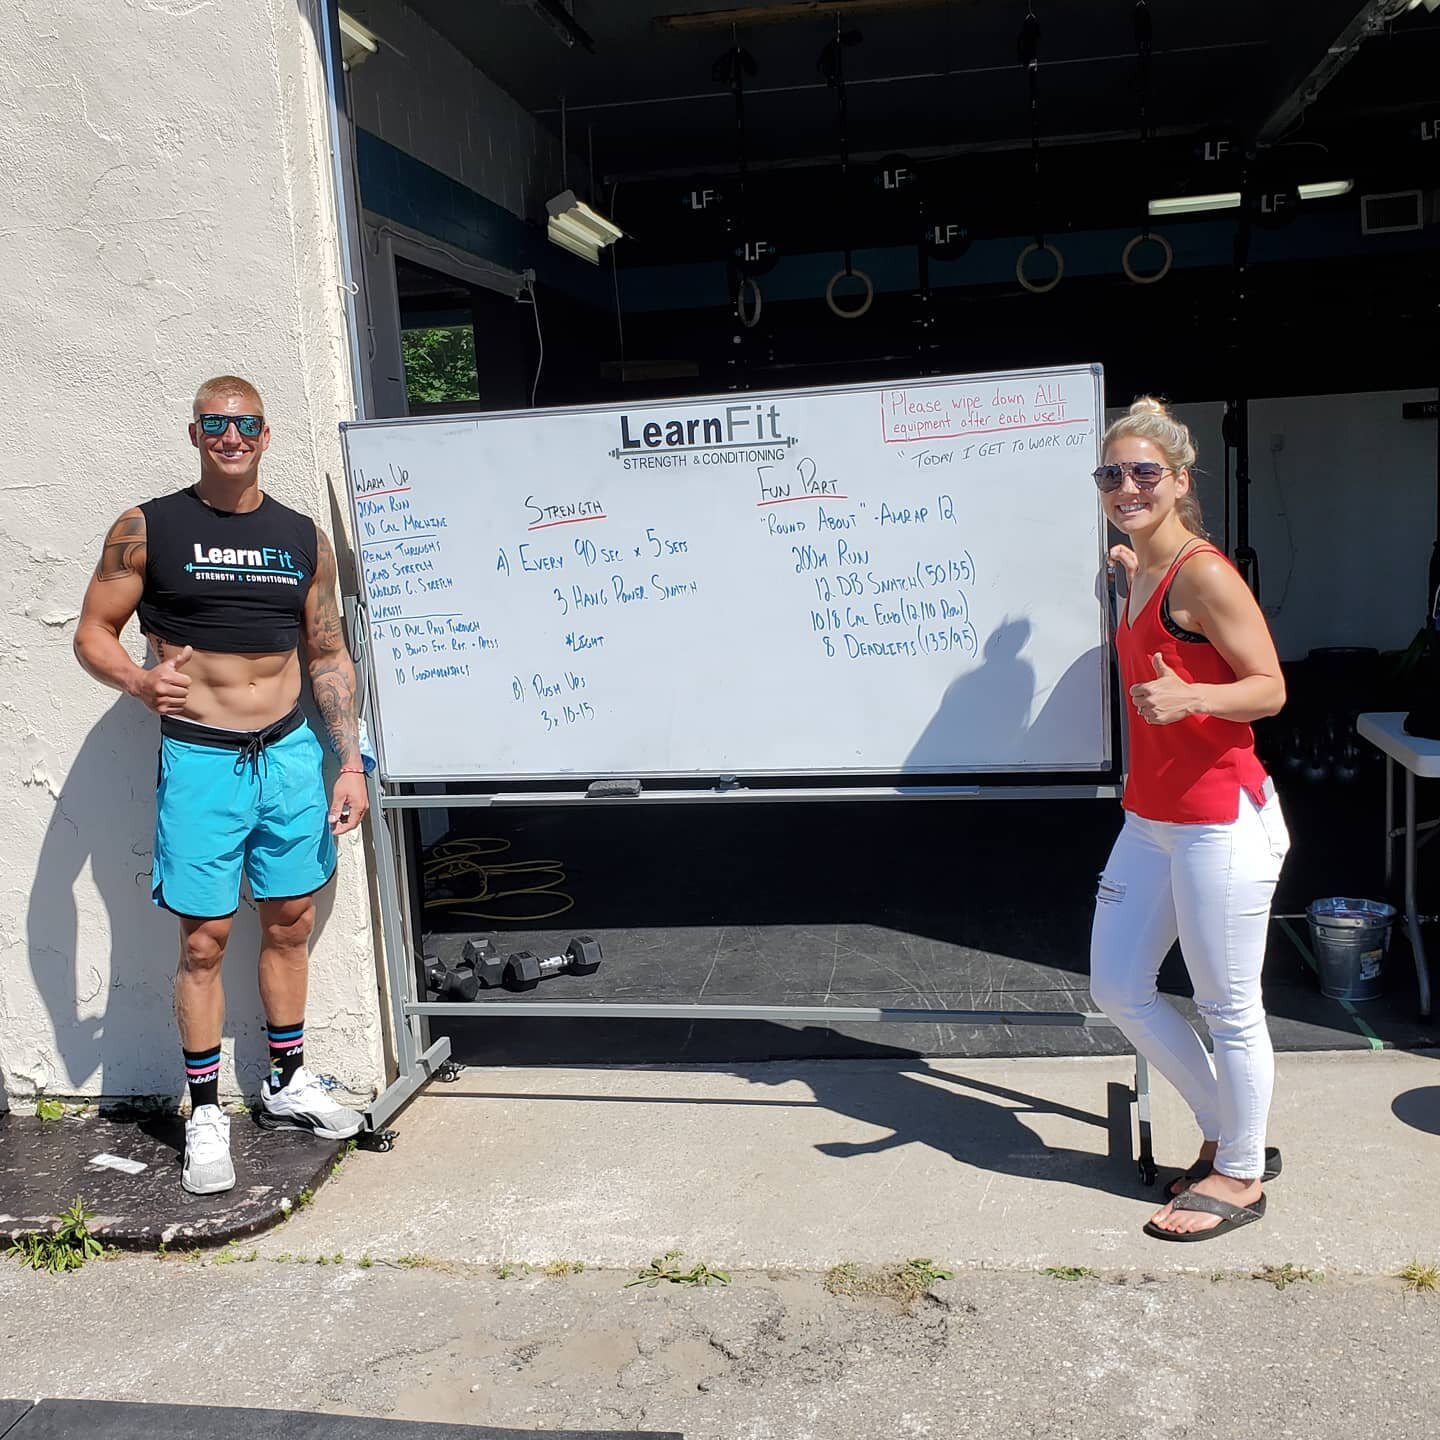 Come on out to Learnfit and have some fun. I promise we have a class atmosphere like no other! You wont be disappointed. Contact us today to try out your first class free!!
-
-
#easywork #fitness #fit #southampton #portelgin #saugeenshores #class